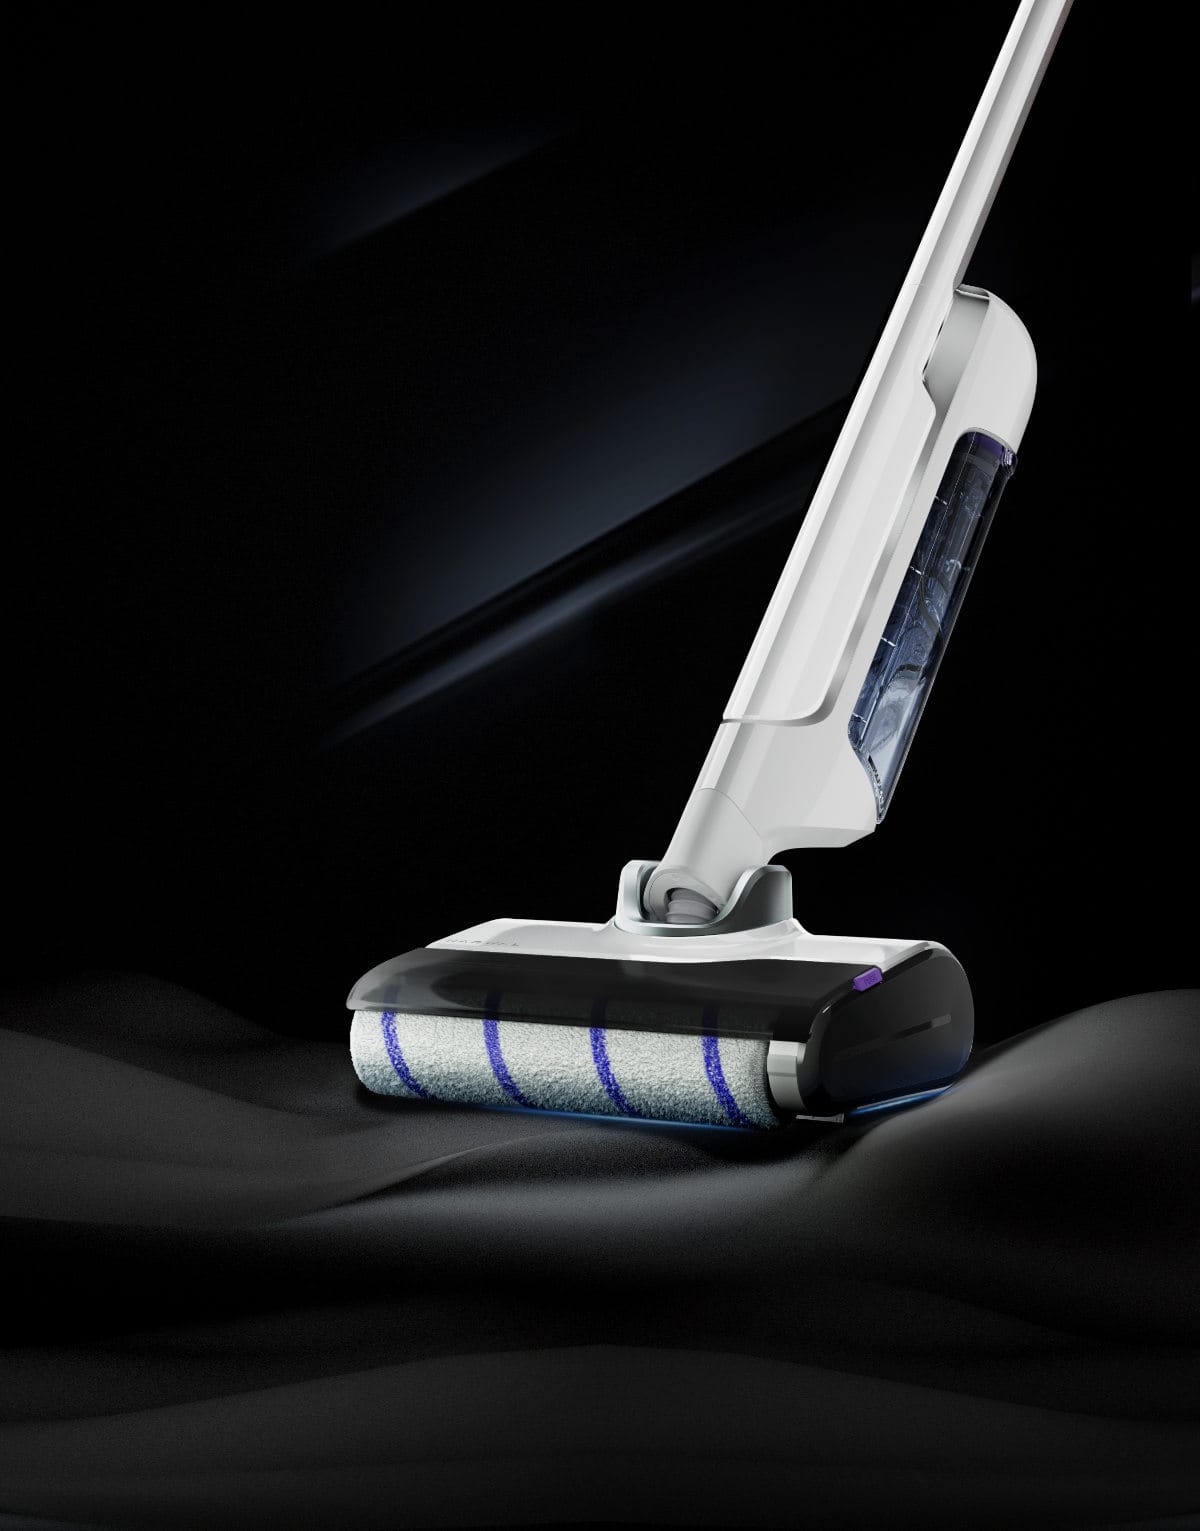 Narwal announces its new S10 Pro wet & dry vacuum mop